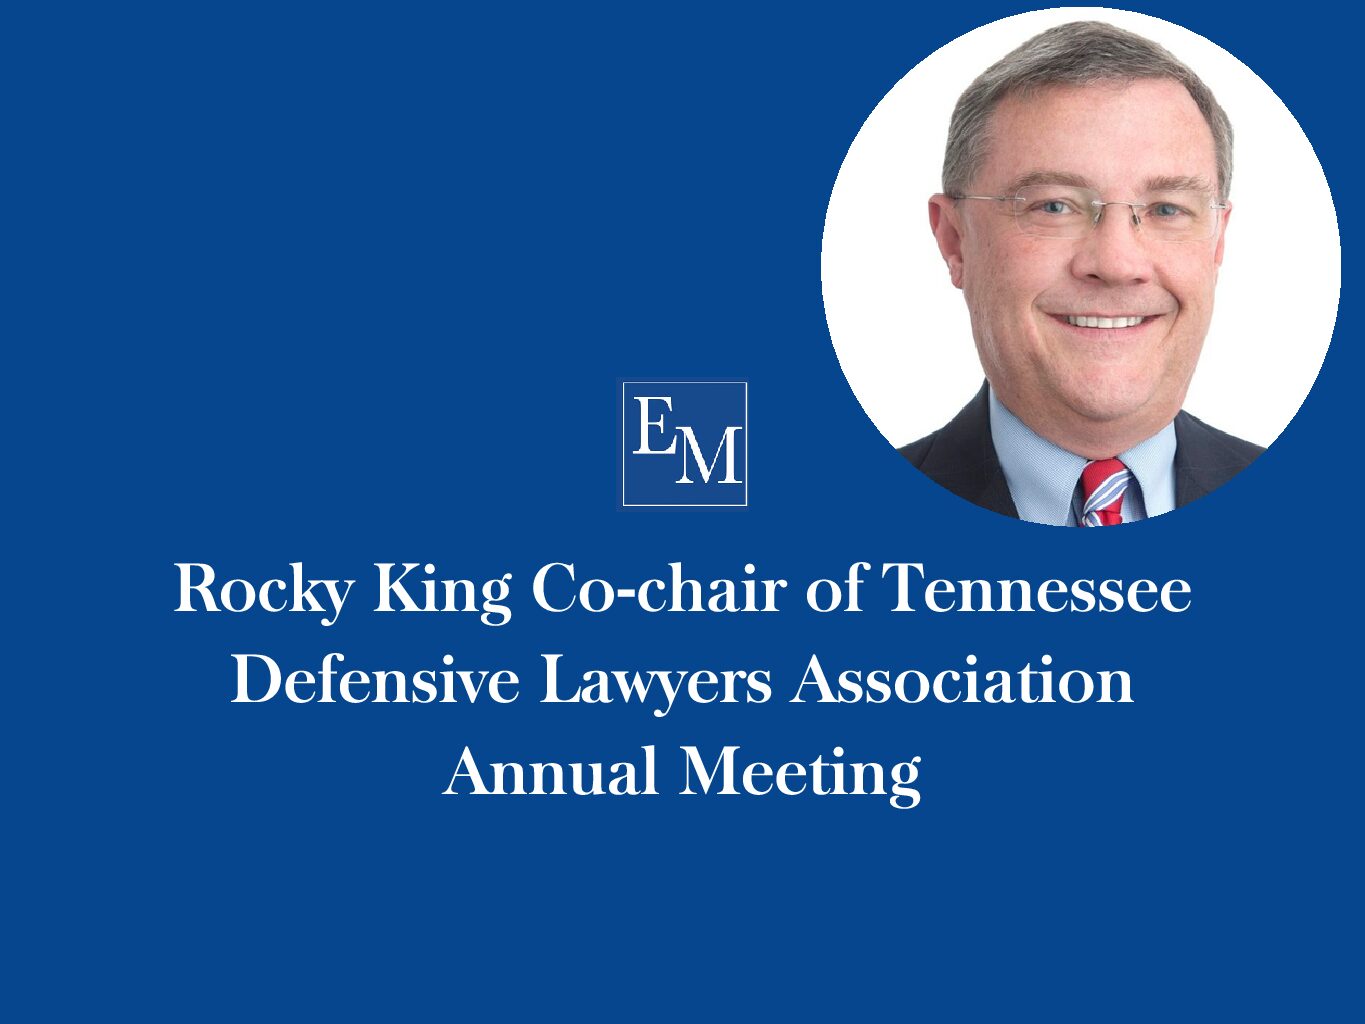 Rocky King Co-chair of Tennessee Defensive Lawyers Association Annual Meeting